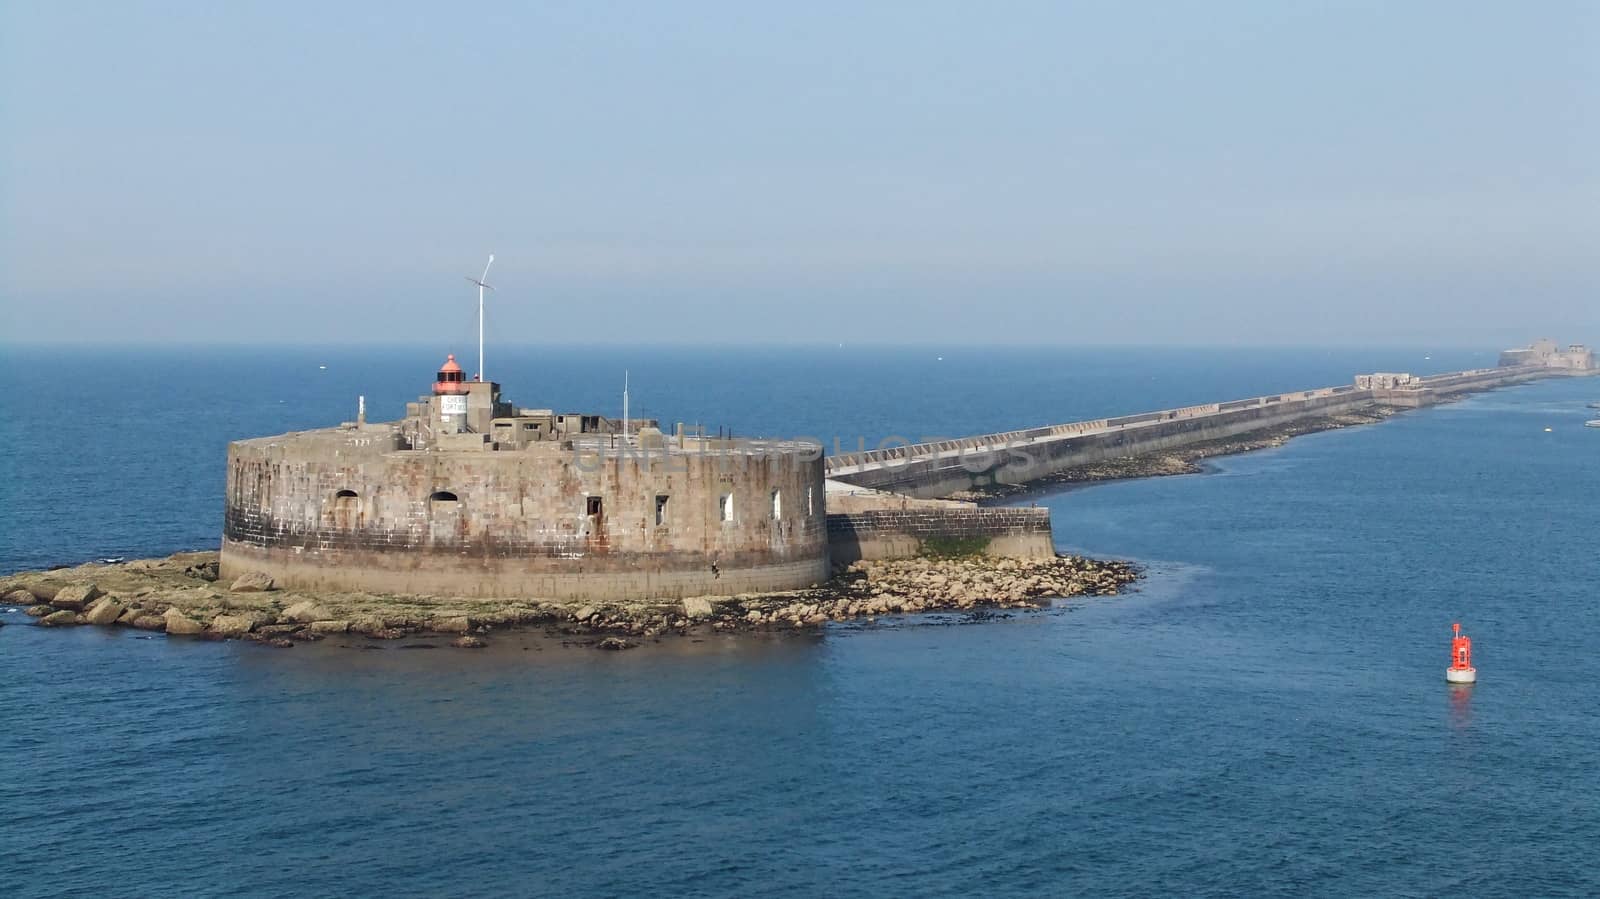 Fort de l'Ouest, Cherbourg Harbour a harbour in France, is believed to be the second largest artificial harbour in the world.